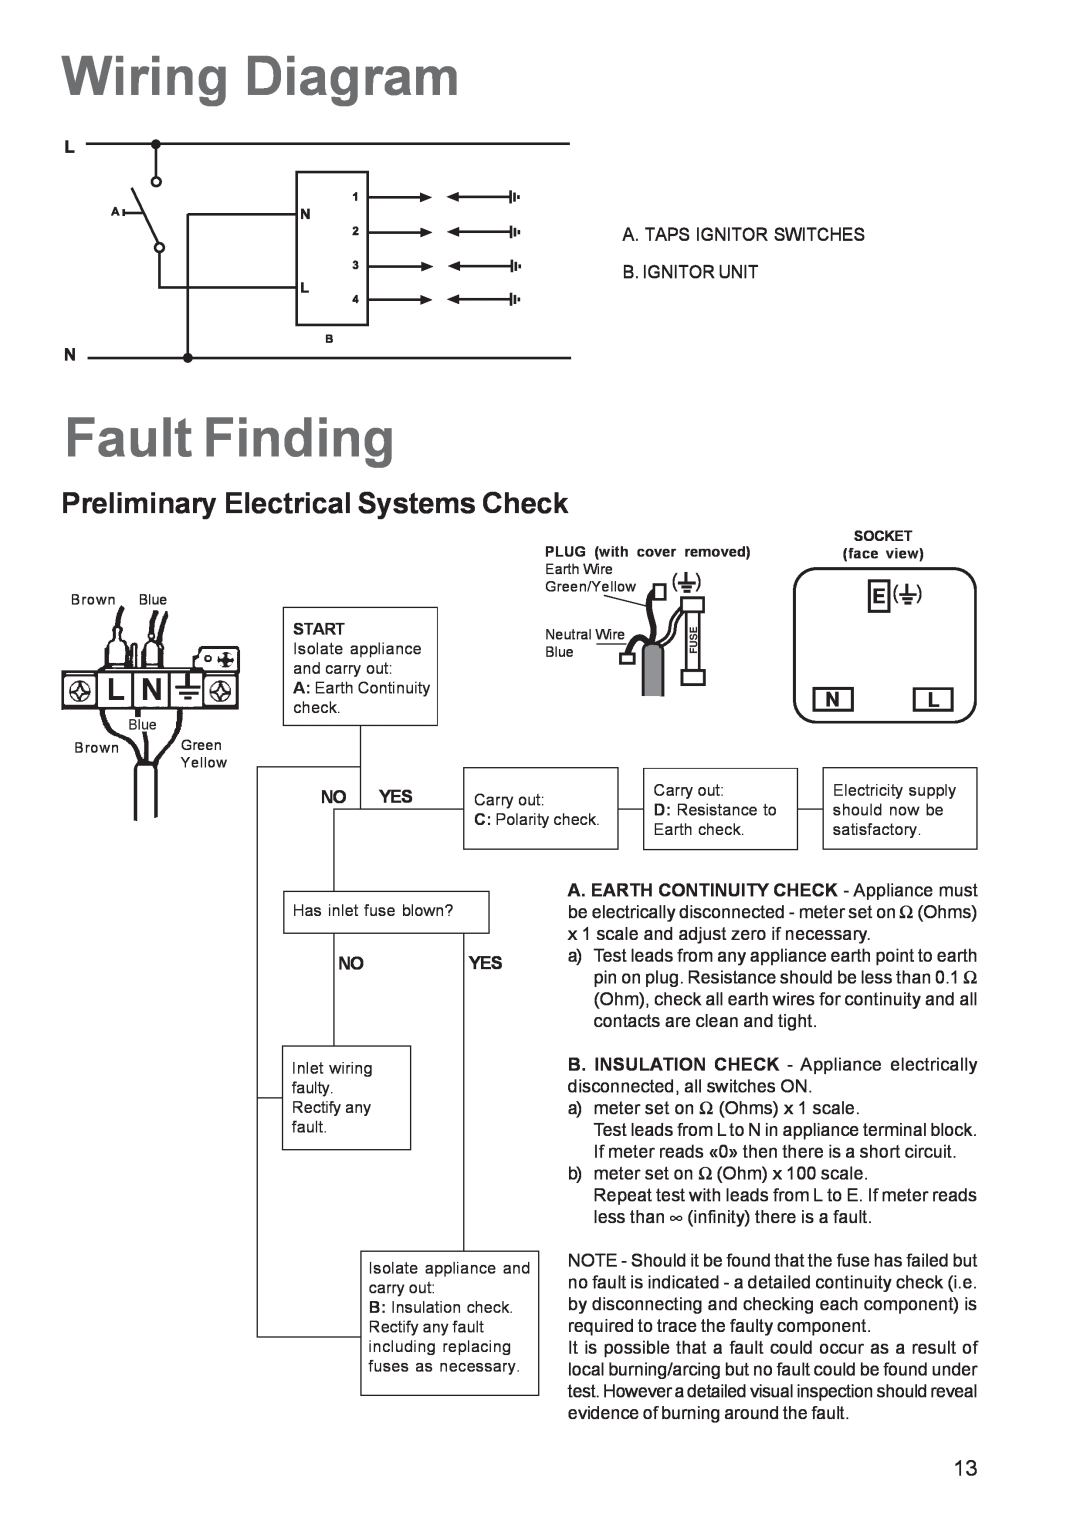 Zanussi ZGL 62 manual Wiring Diagram, Fault Finding, Preliminary Electrical Systems Check 